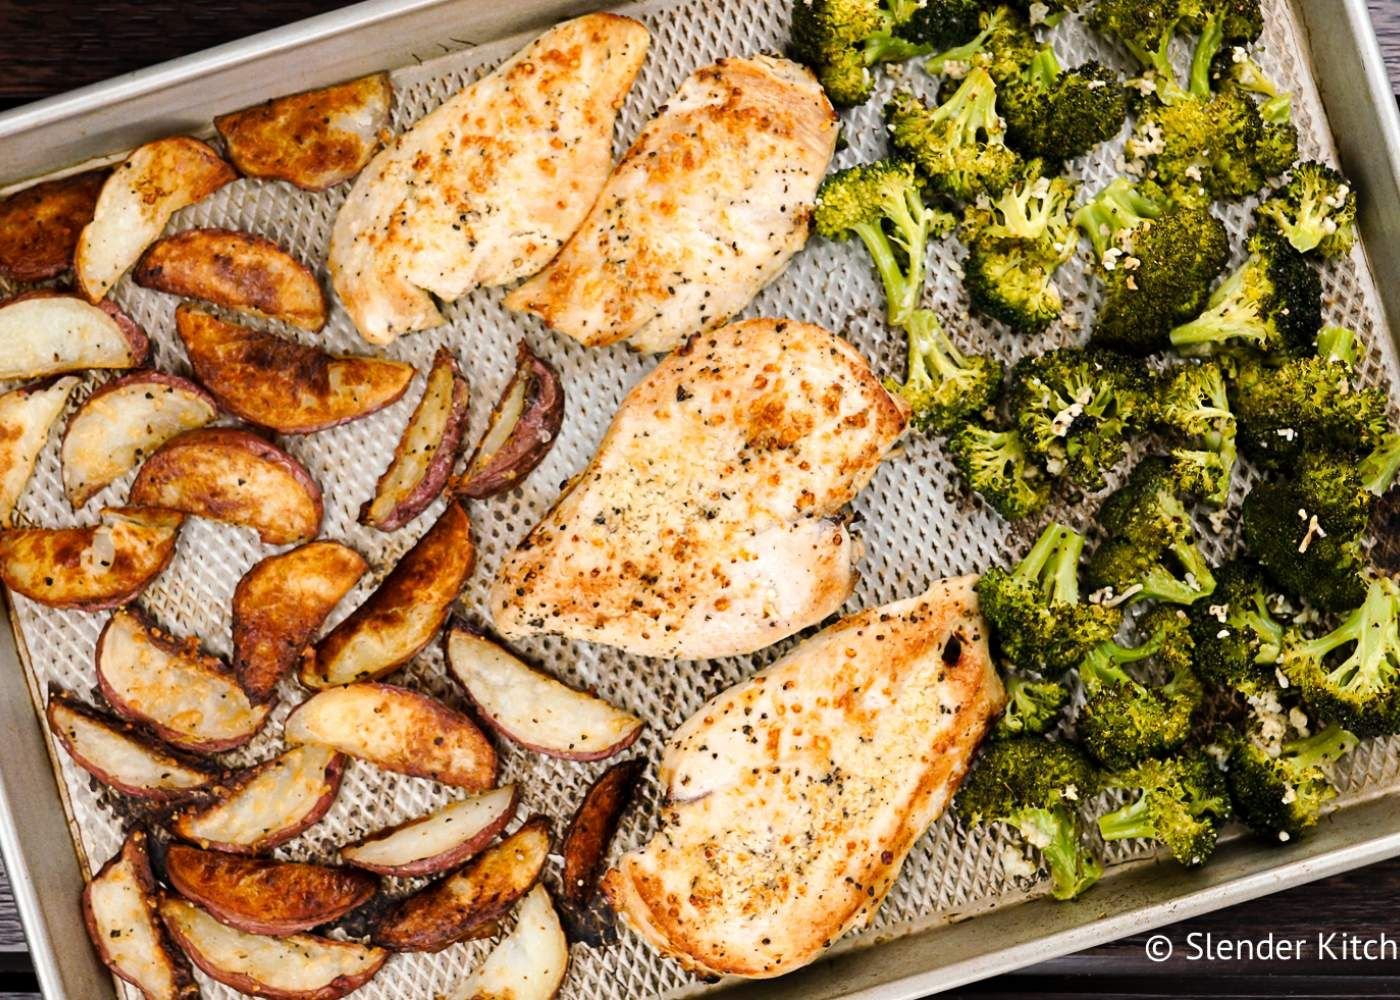 Roasted Chicken and potatoes with broccoli on a sheet pan.